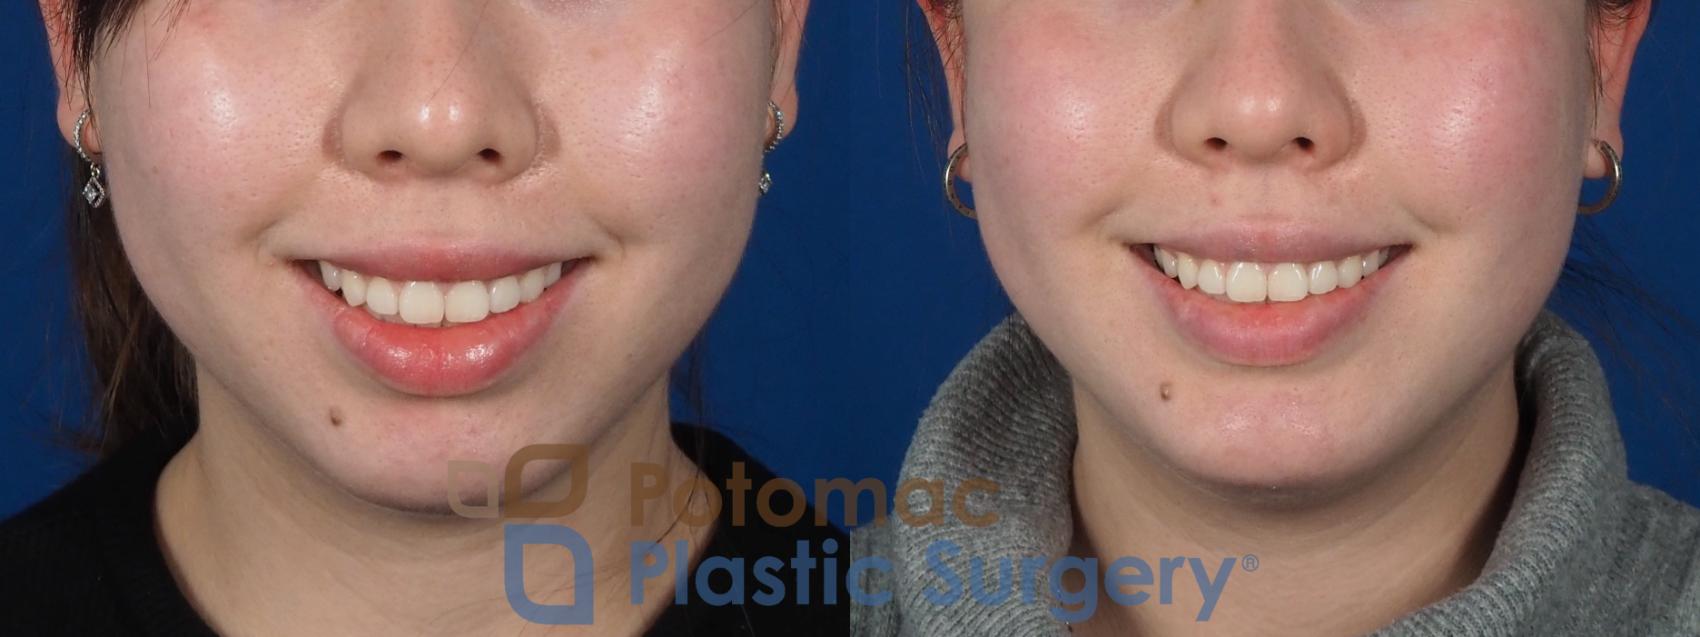 Before & After Chin Augmentation Case 280 Front - Smile View in Washington, DC